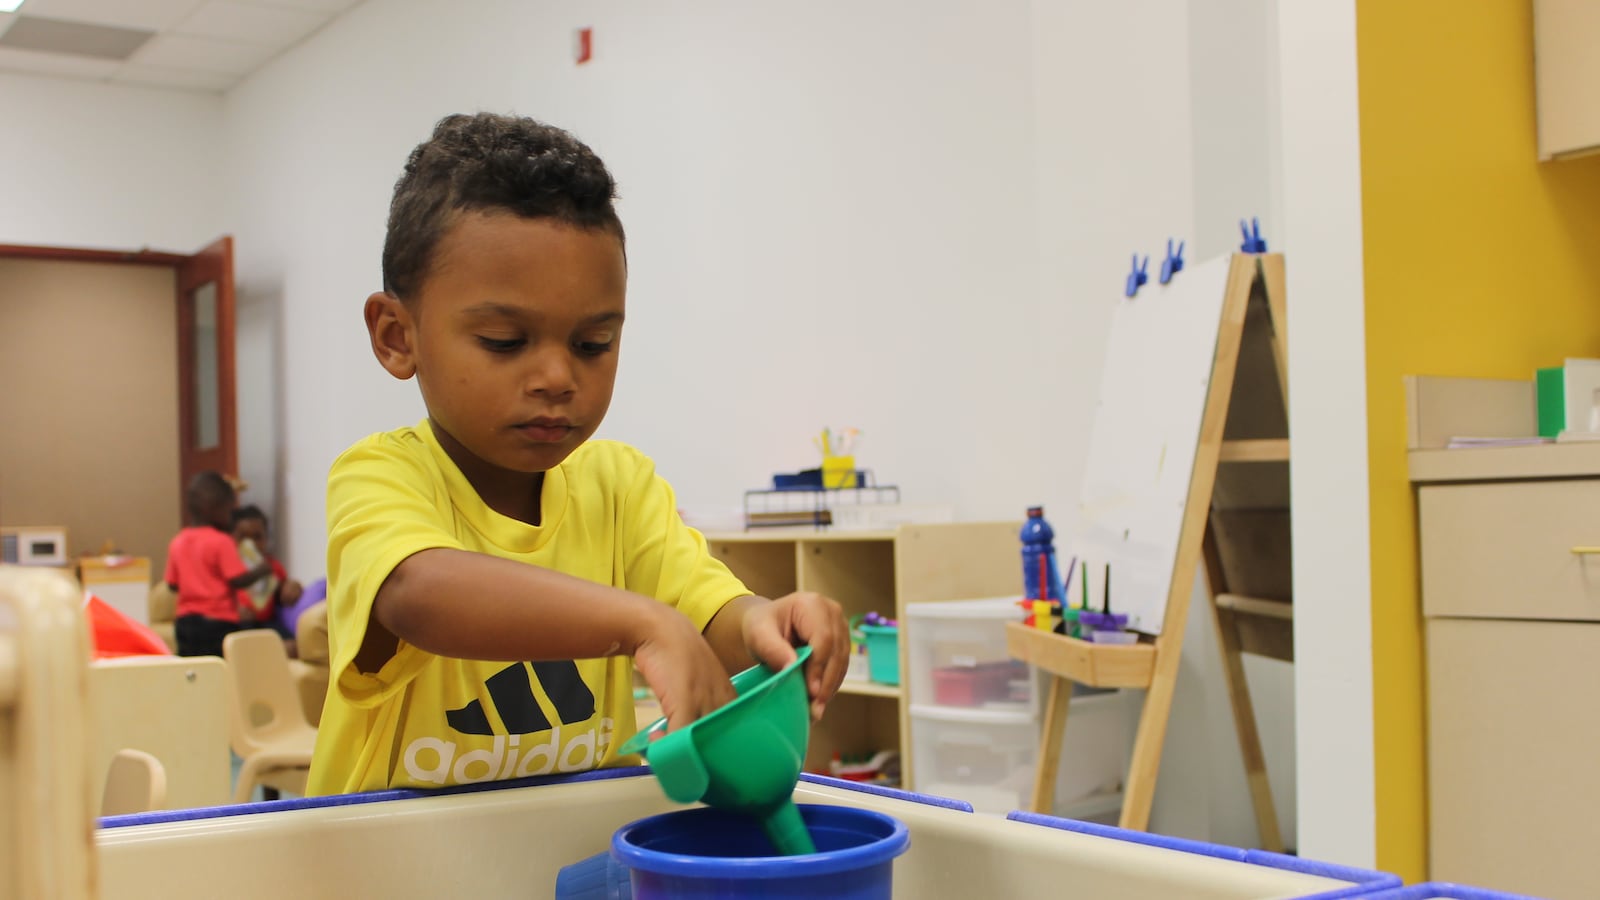 Three-year-old Ra'Jon Whitaker plays at a sensory center in his preschool classroom at Day Early Learning at Eastern Star Church.